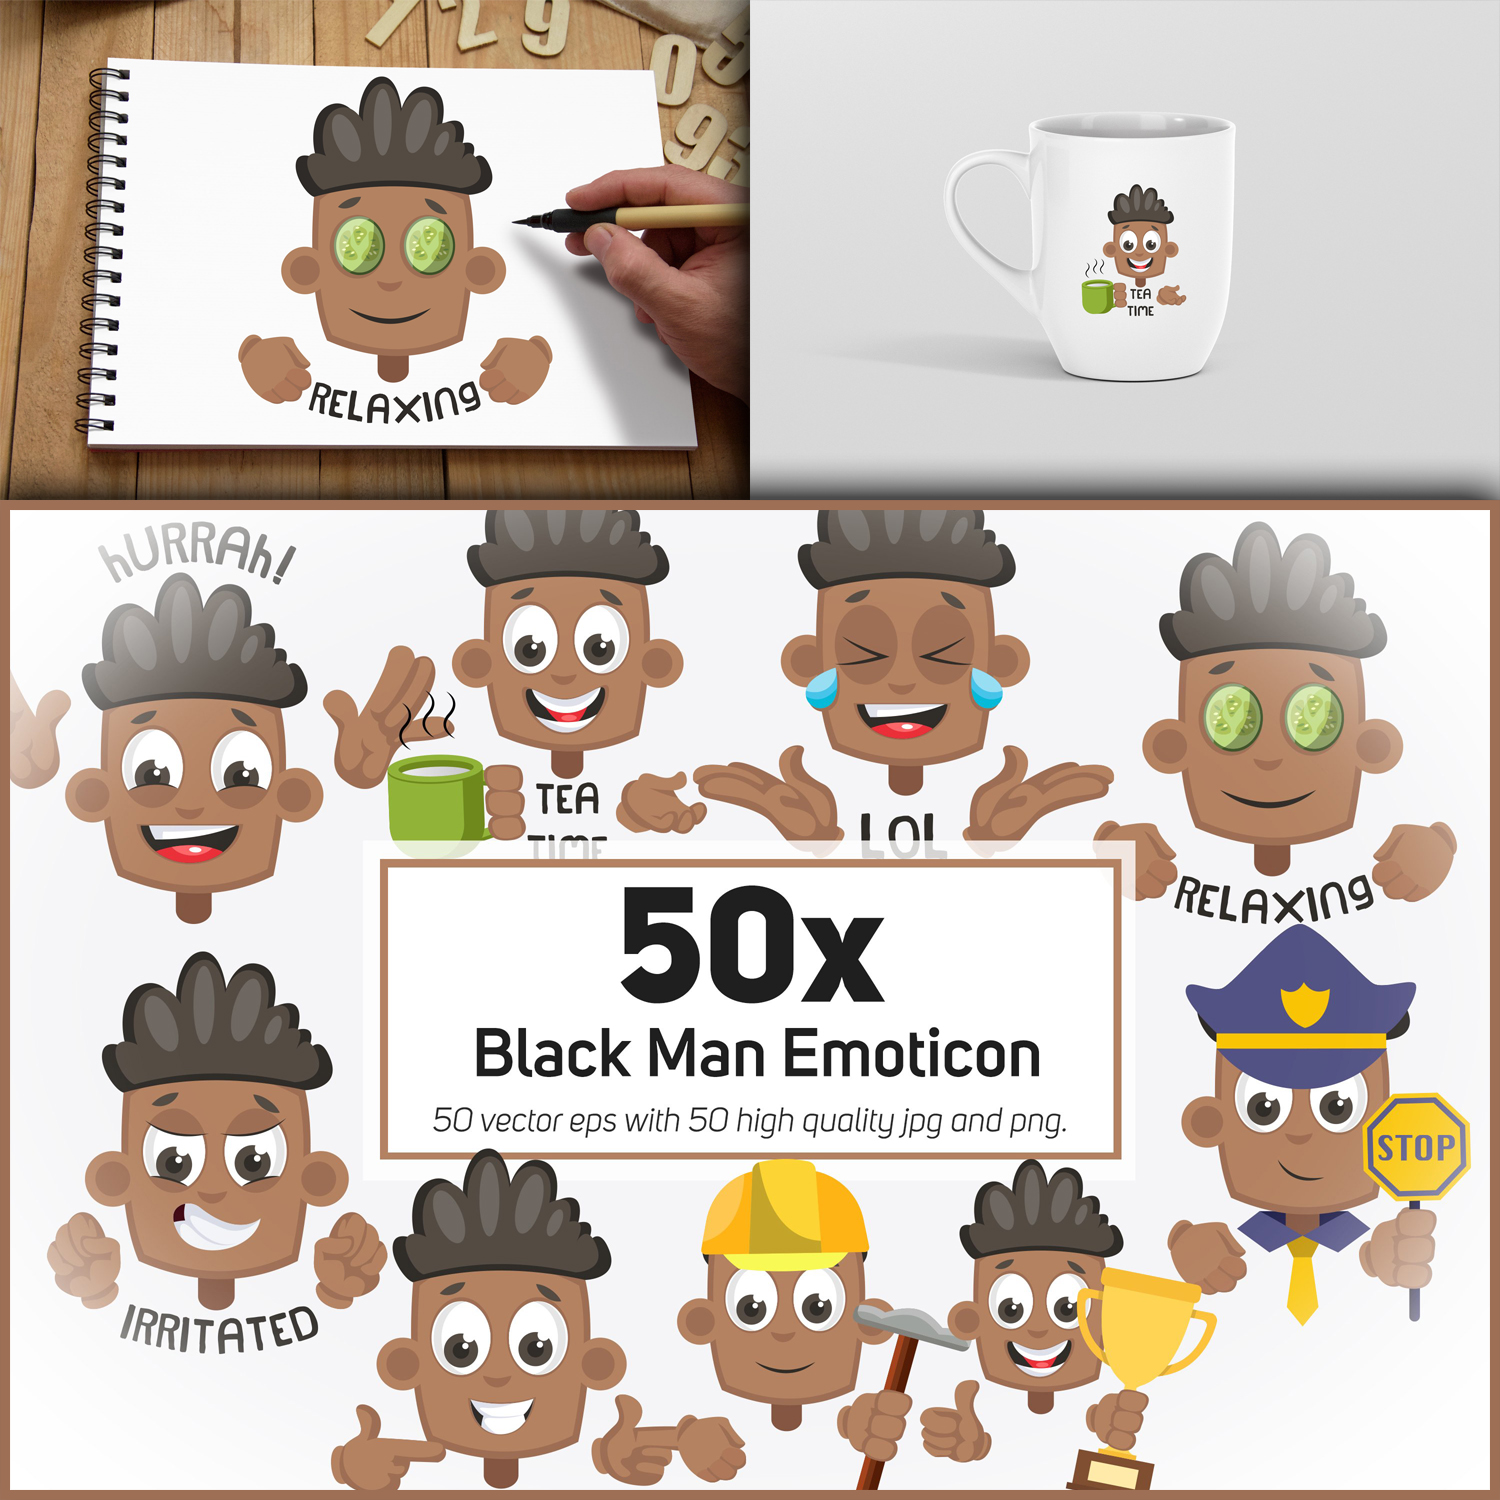 50x Black Man Emoticon or Sticker character collection cover.